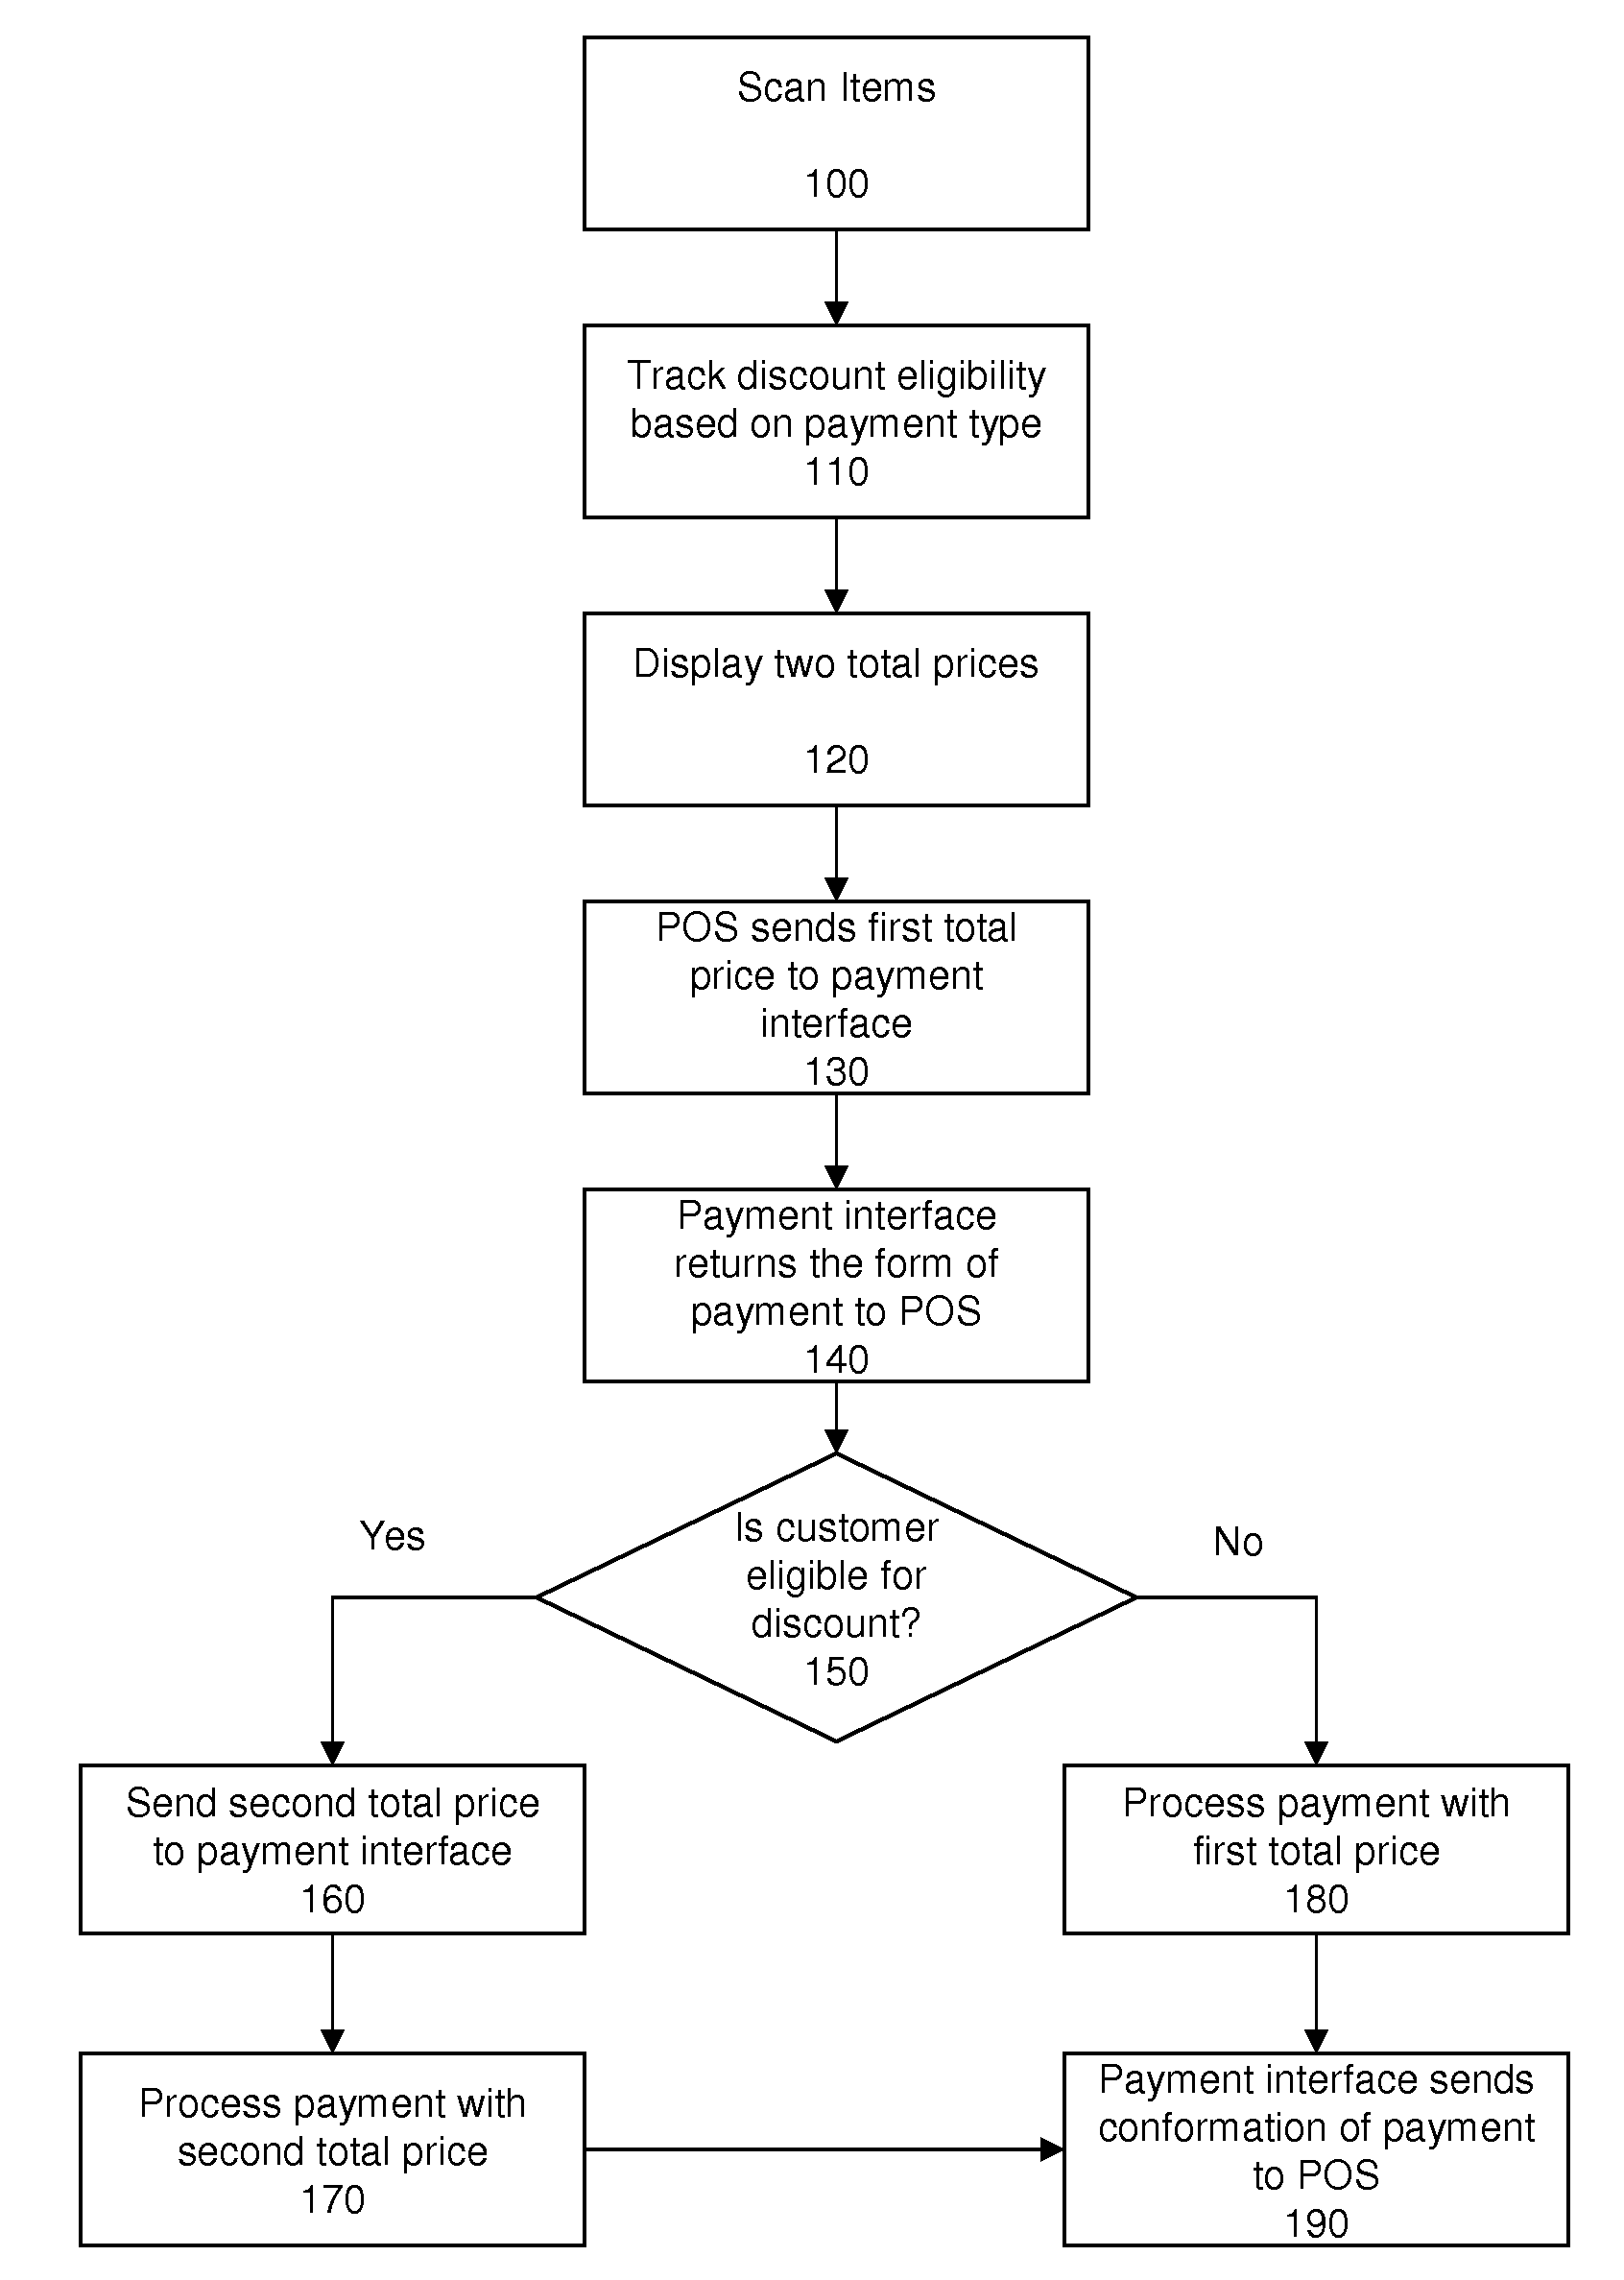 Point-Of-Sale System Implementing Criteria-Based Transaction Totals